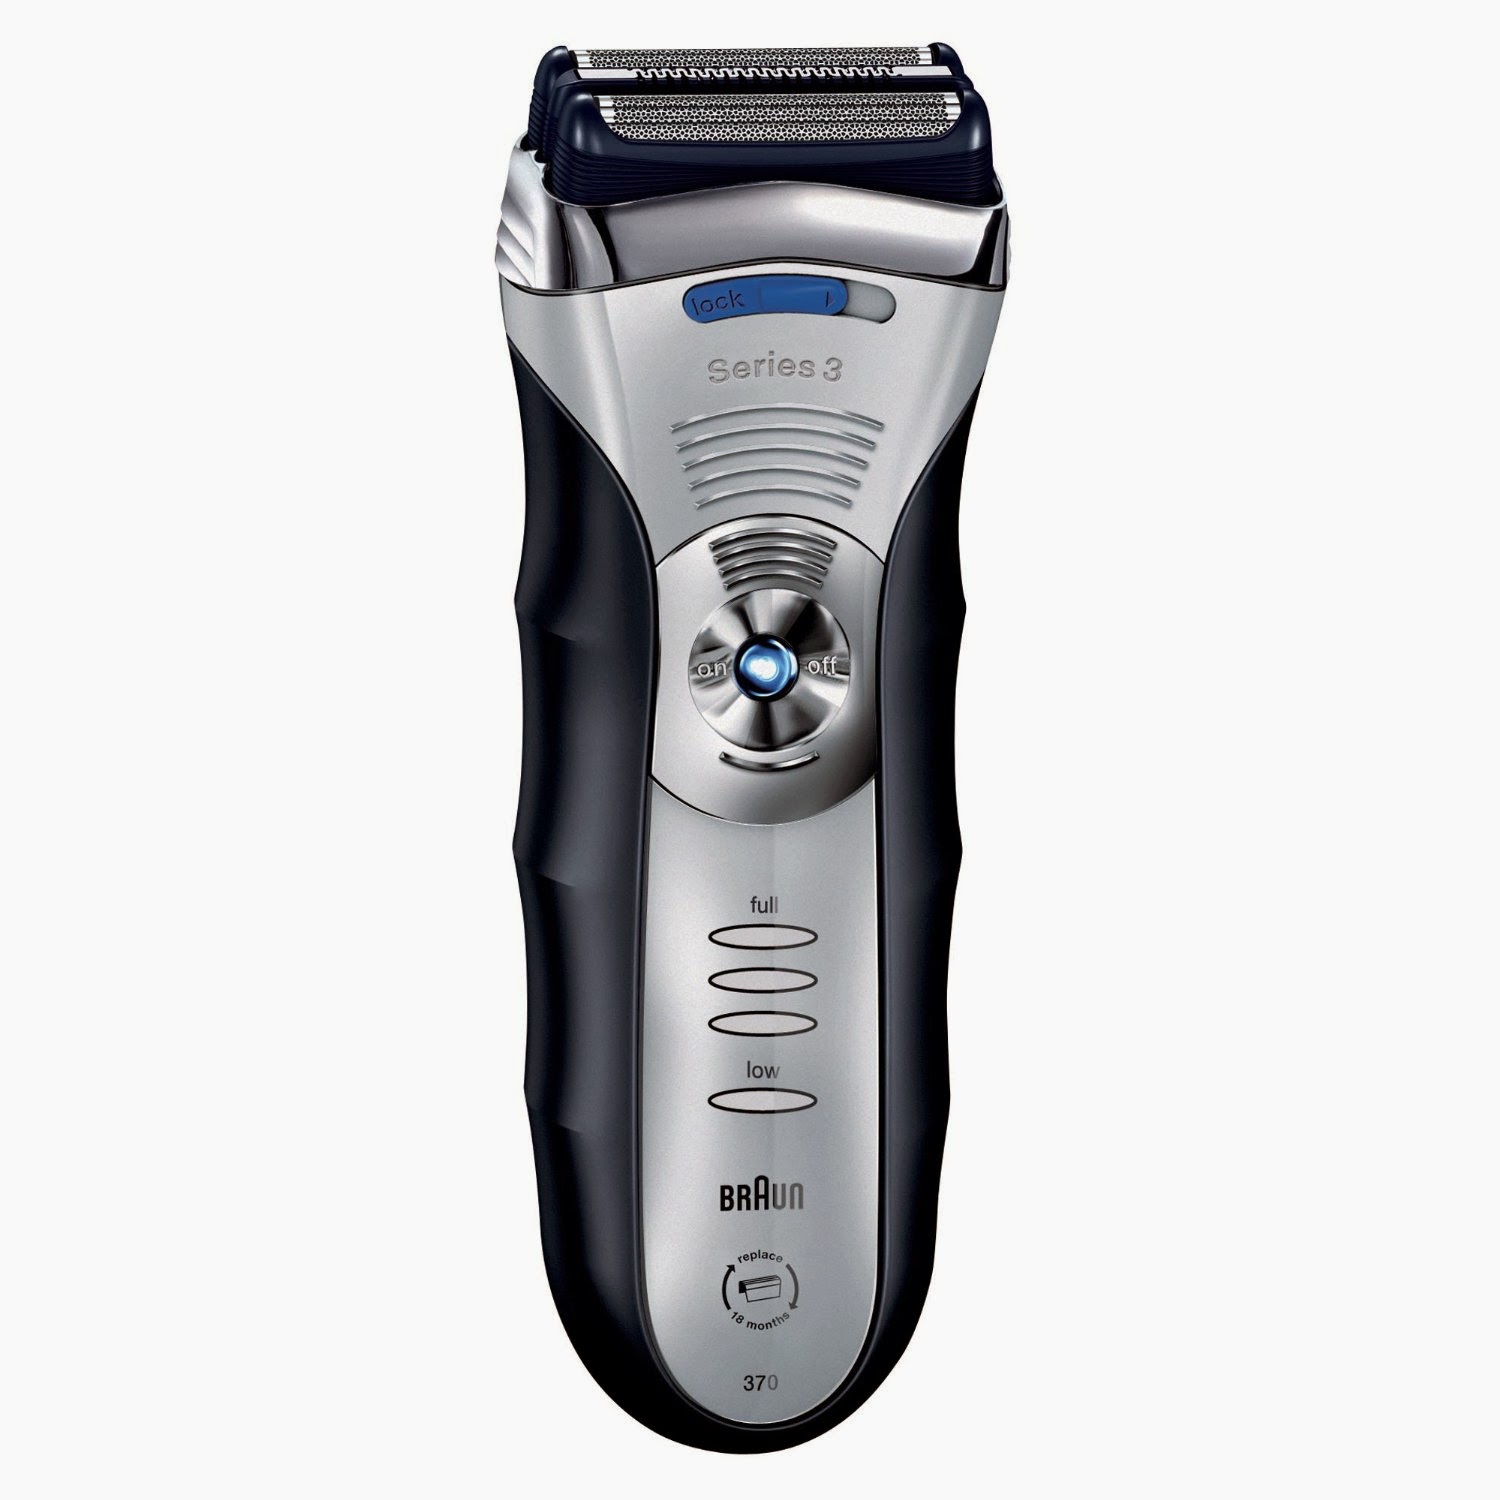 electric shavers vy bruan